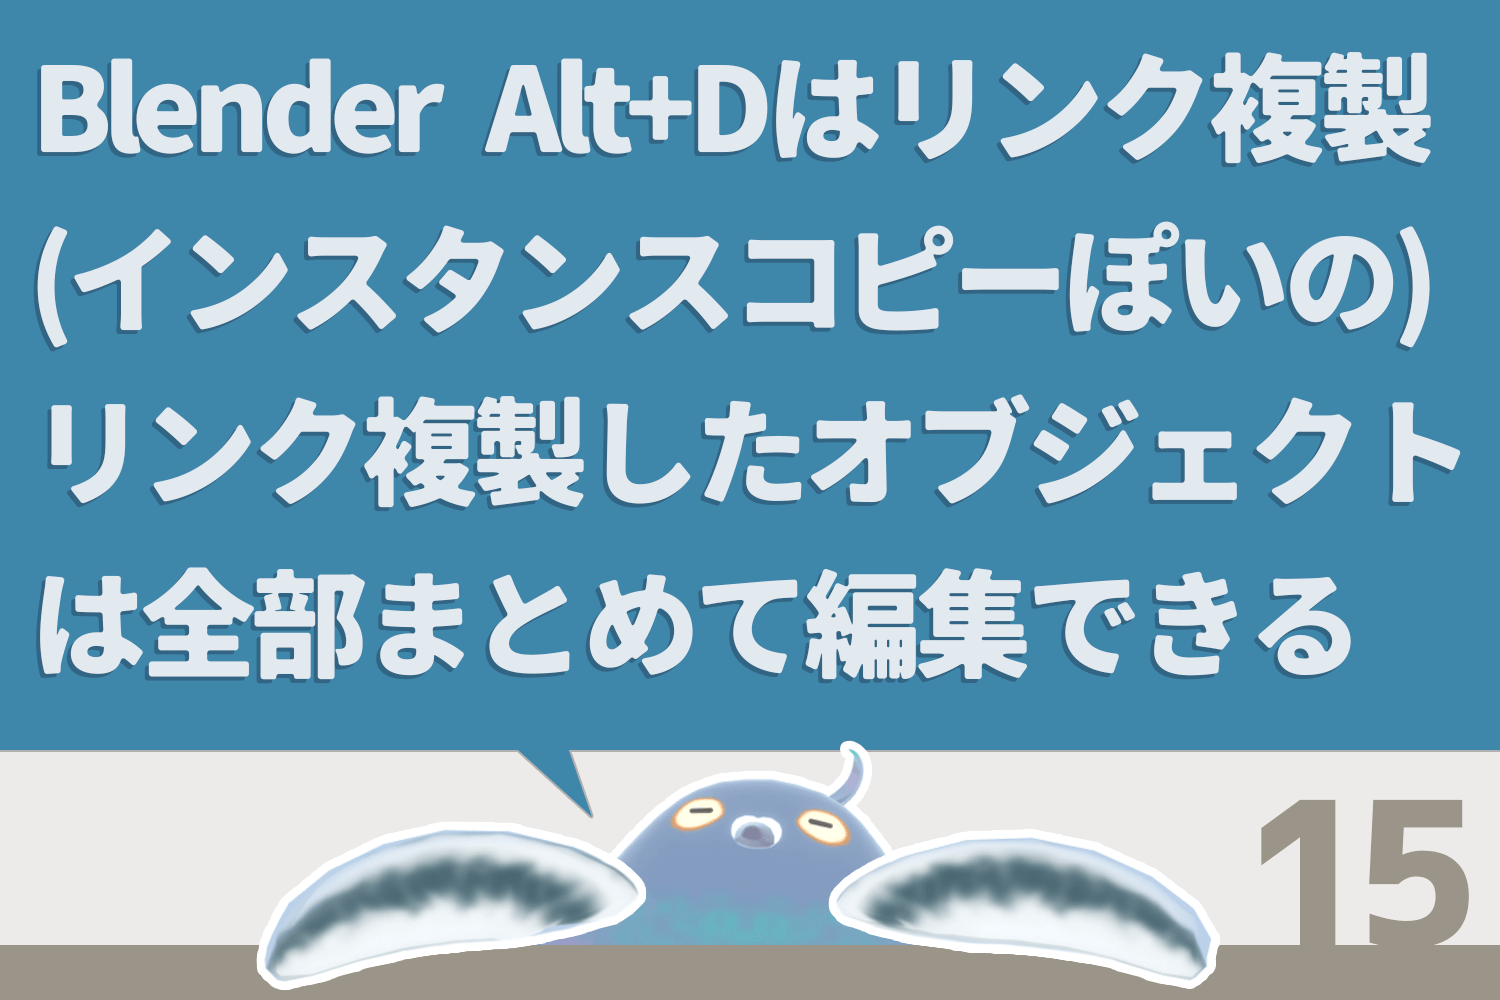 Blender Alt+D is a link duplicator (like instance copy), and all duplicated objects can be edited together.